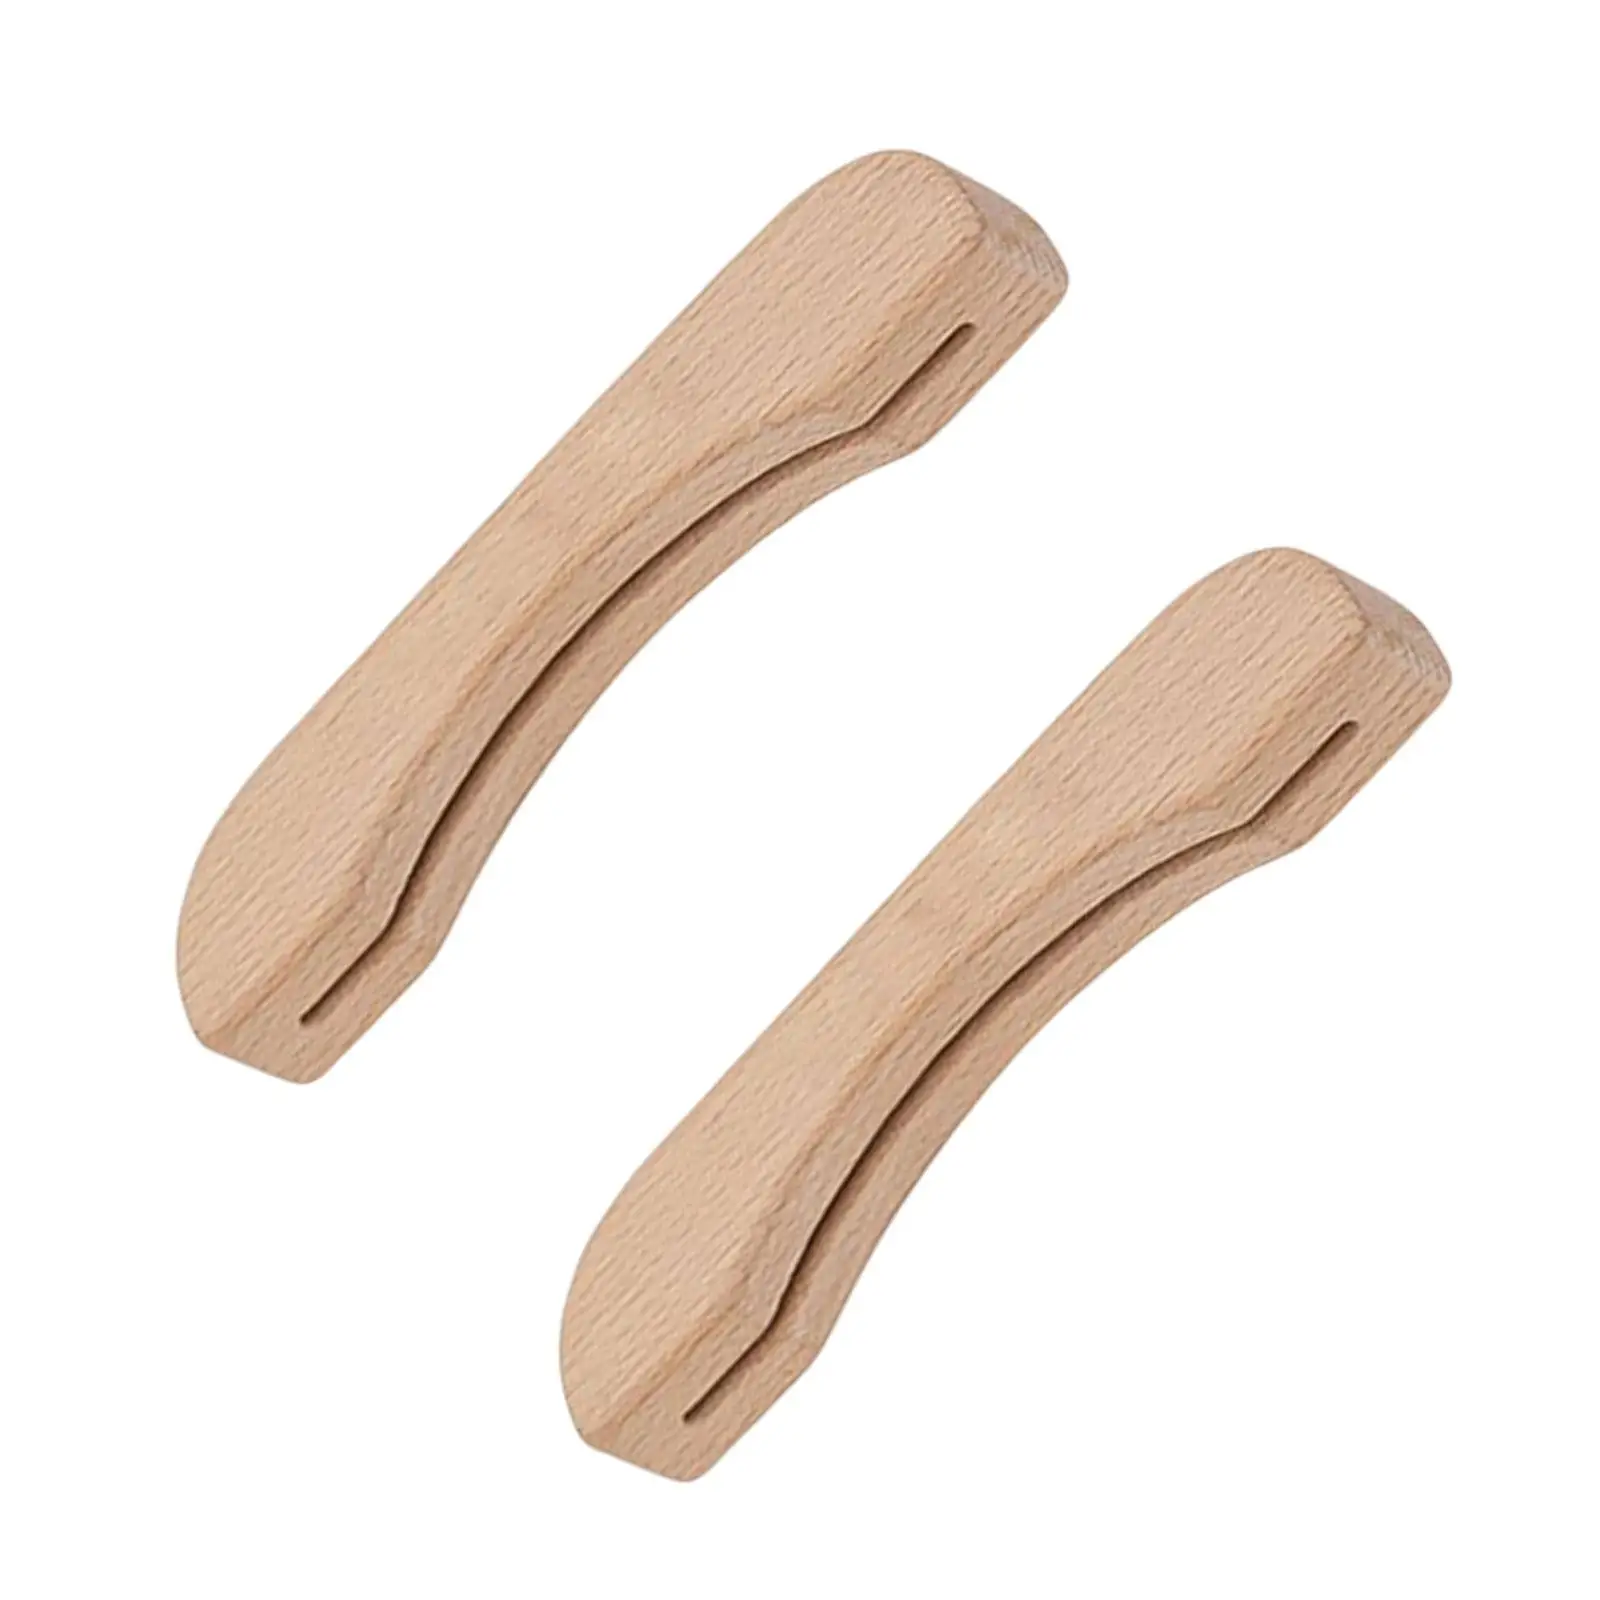 2Pcs Wooden BBQ Barbecue Pan Handle Scald Proof Insulated for Sauce Pan